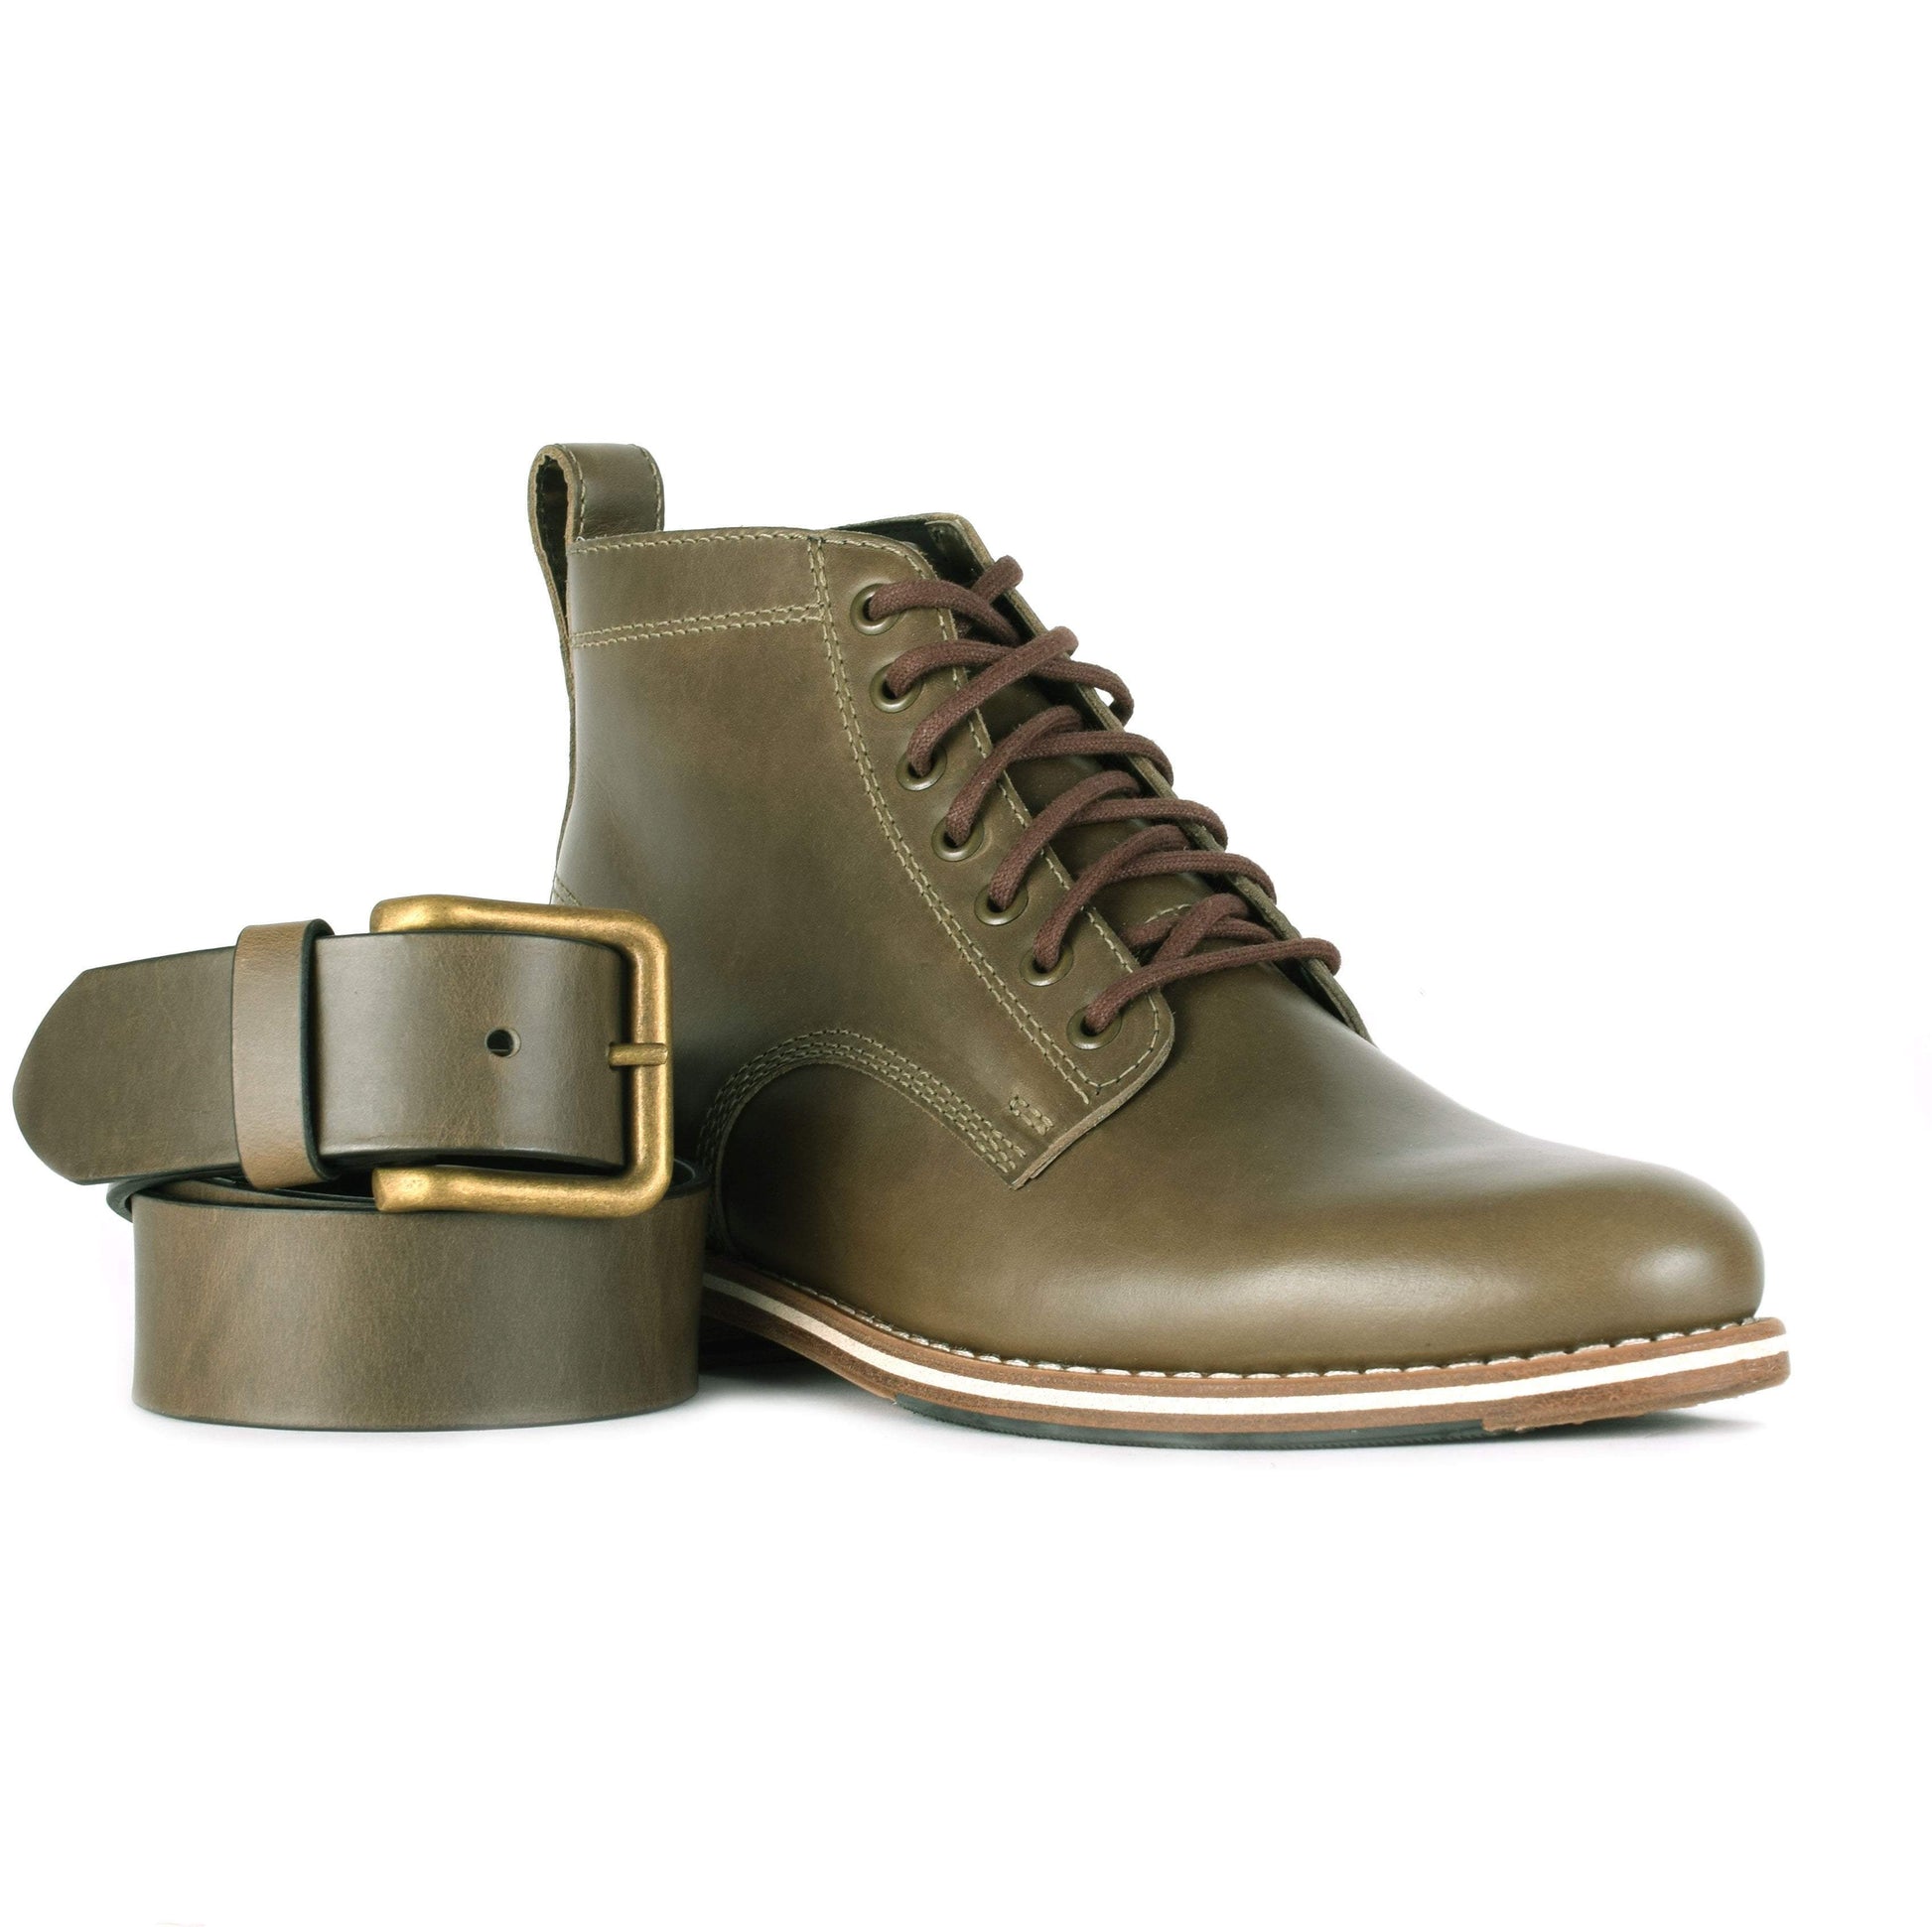 HELM Accessories / Olive Brass Buckle Wide Belts